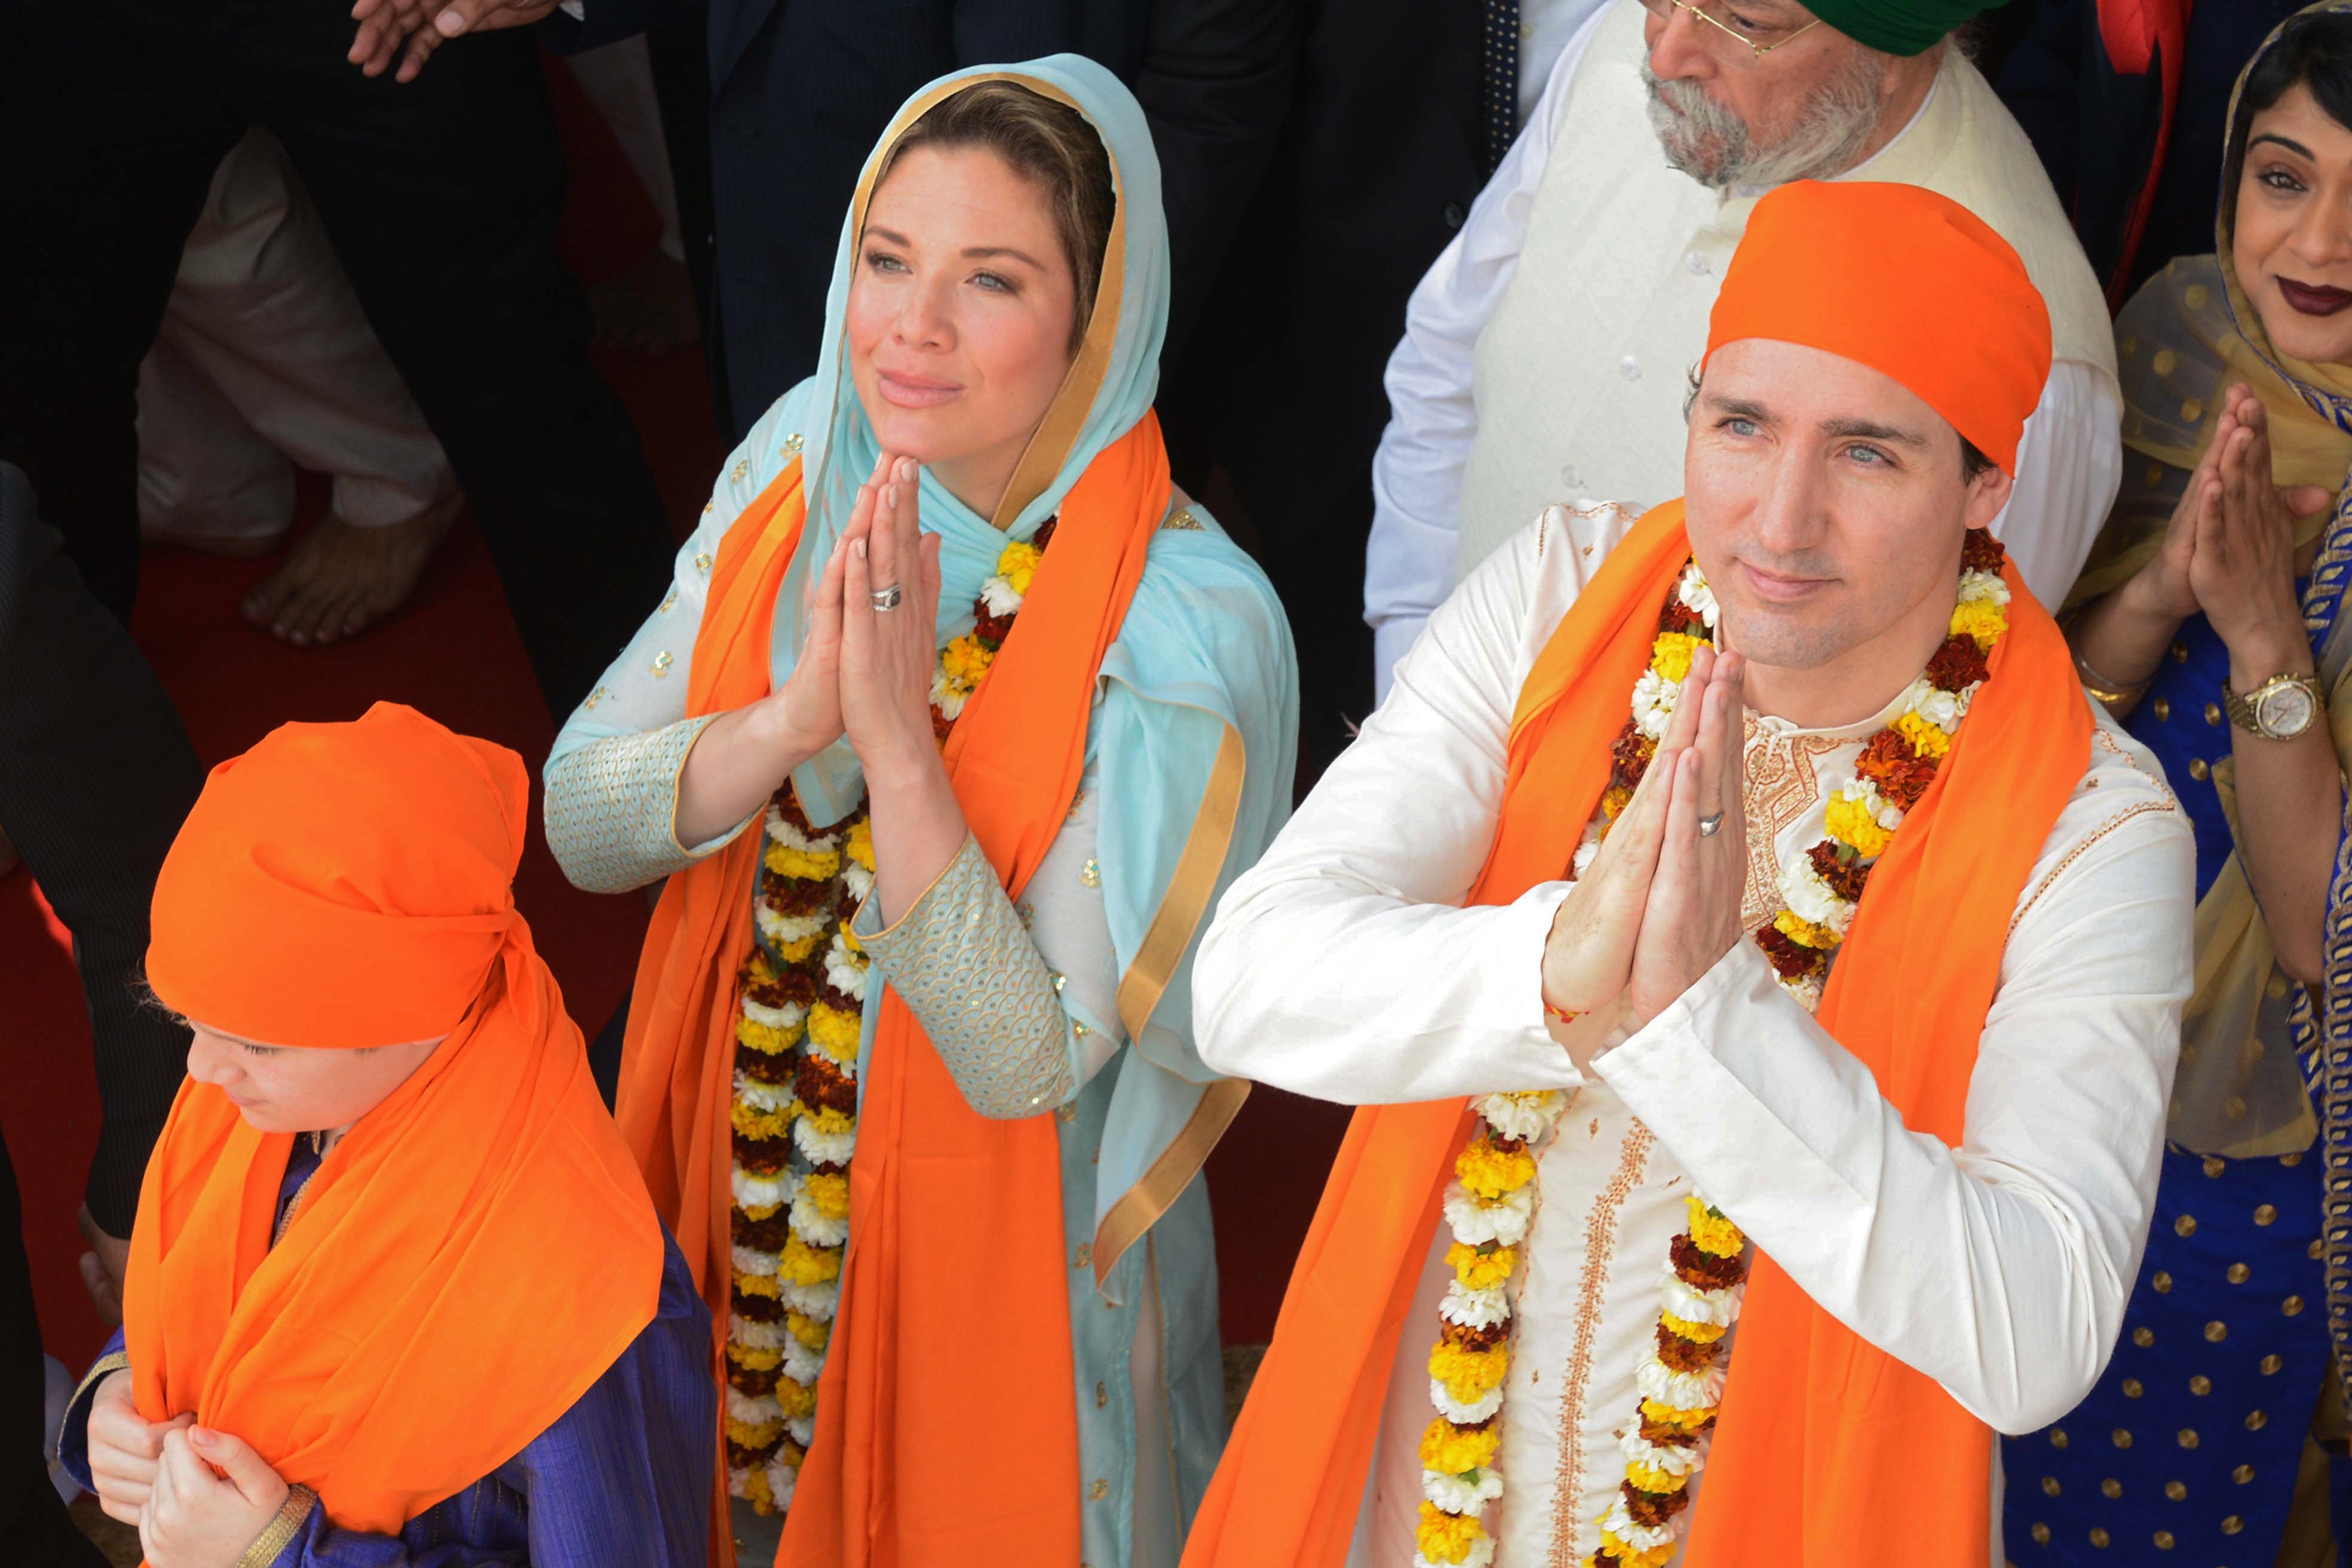 While US president’s son kept his mouth shut and stuck to business, Canadian PM turned himself into a joke who is either genuinely foolish or is cynically playing to his Sikh vote-bank in Canada